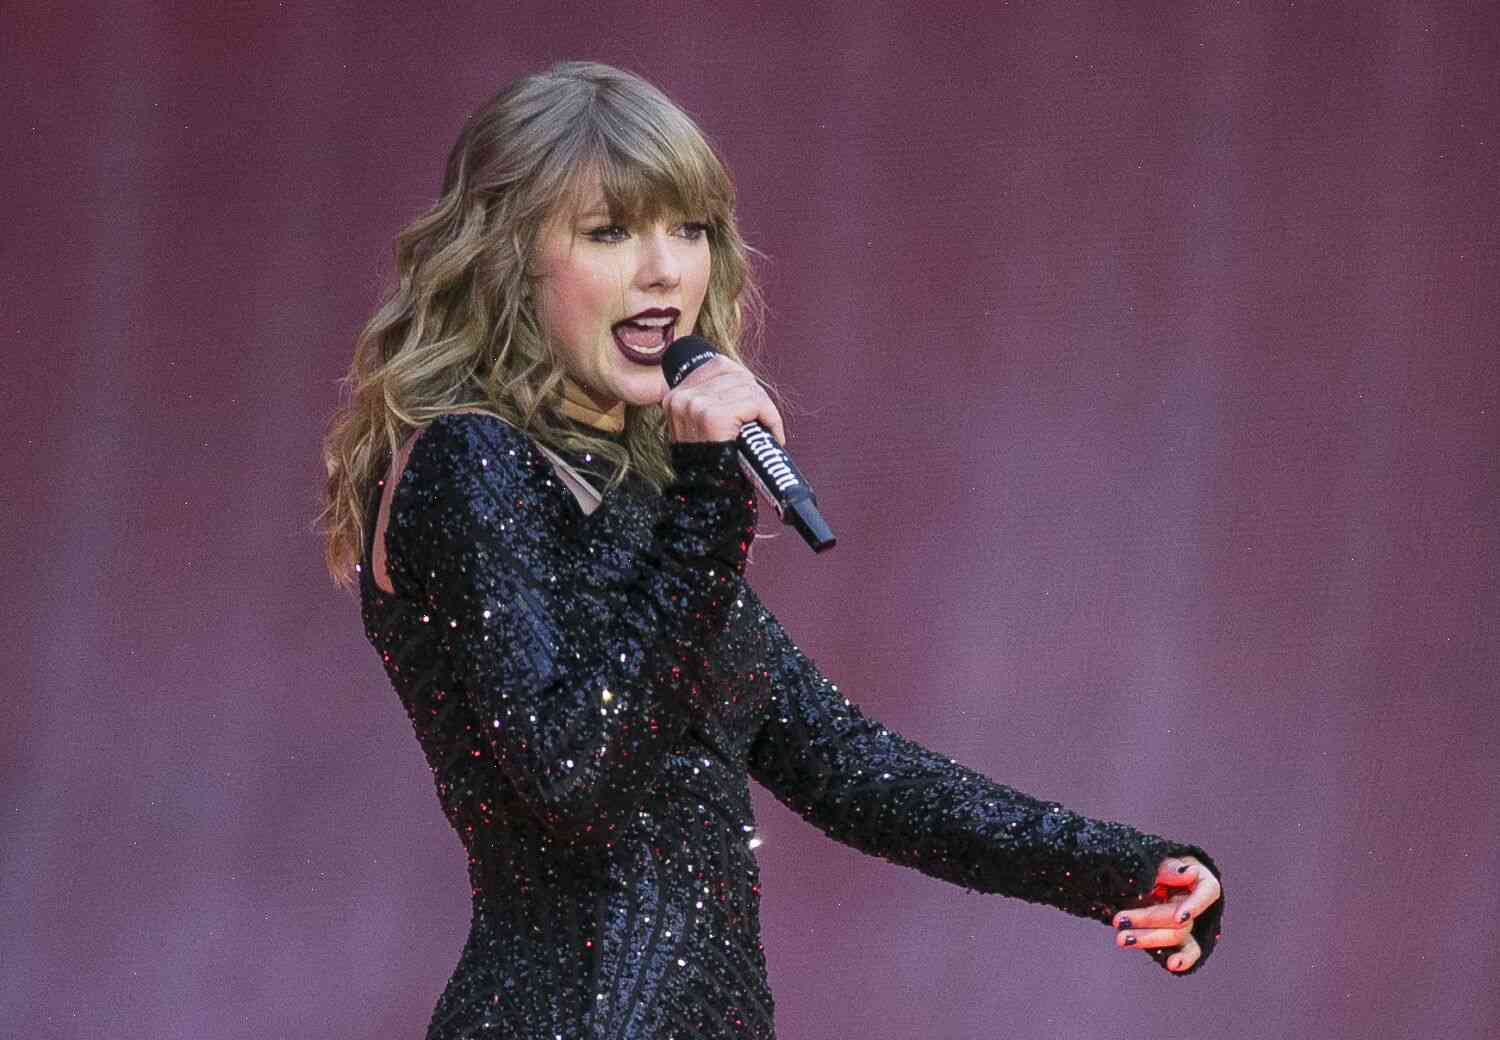 Mike Gallagher believes Taylor Swift’s success comes down to her creative instincts